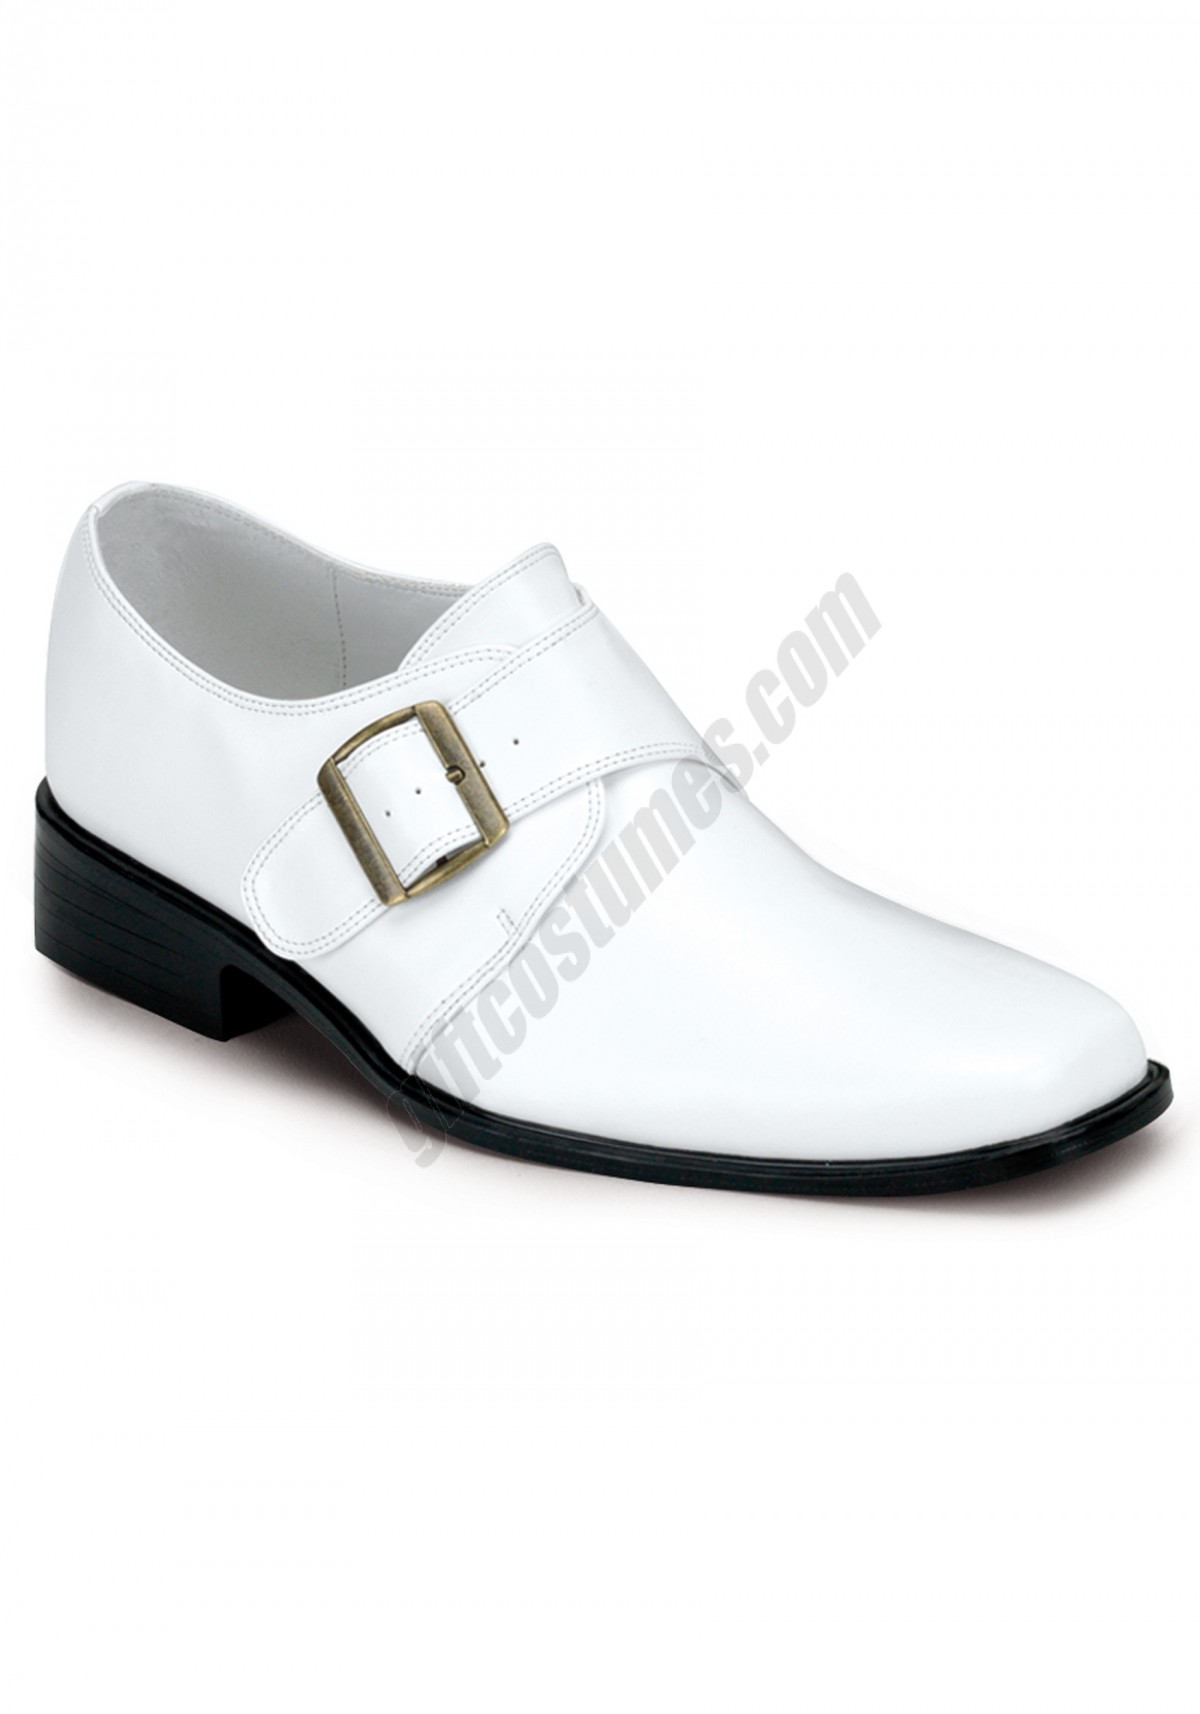 Mens Disco Loafers Promotions - -0